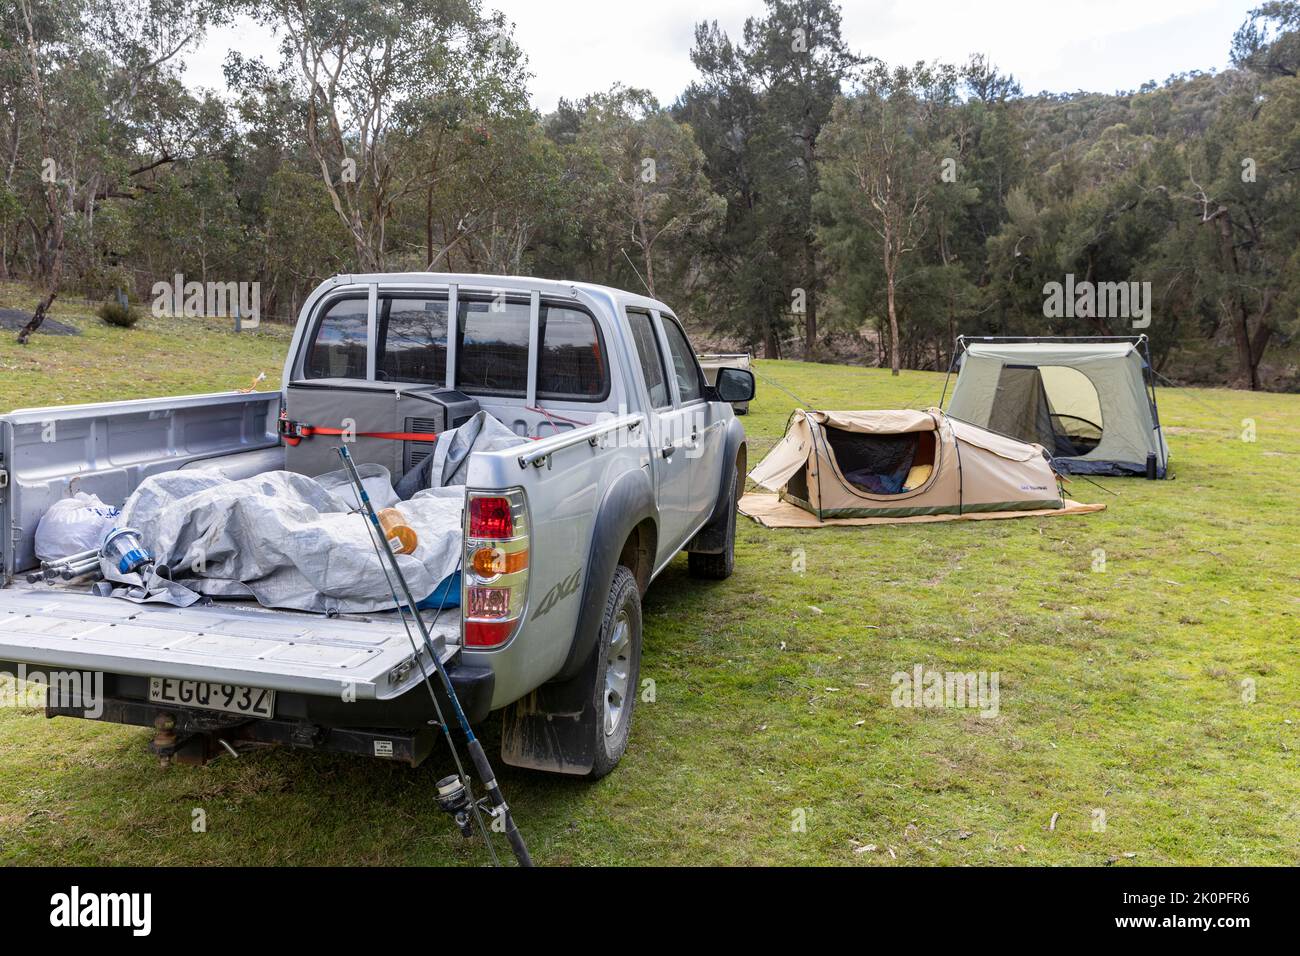 Australian campsite in Abercrombie river national park in regional New South Wales, swag tent and Mazda Ute vehicle,Australia Stock Photo